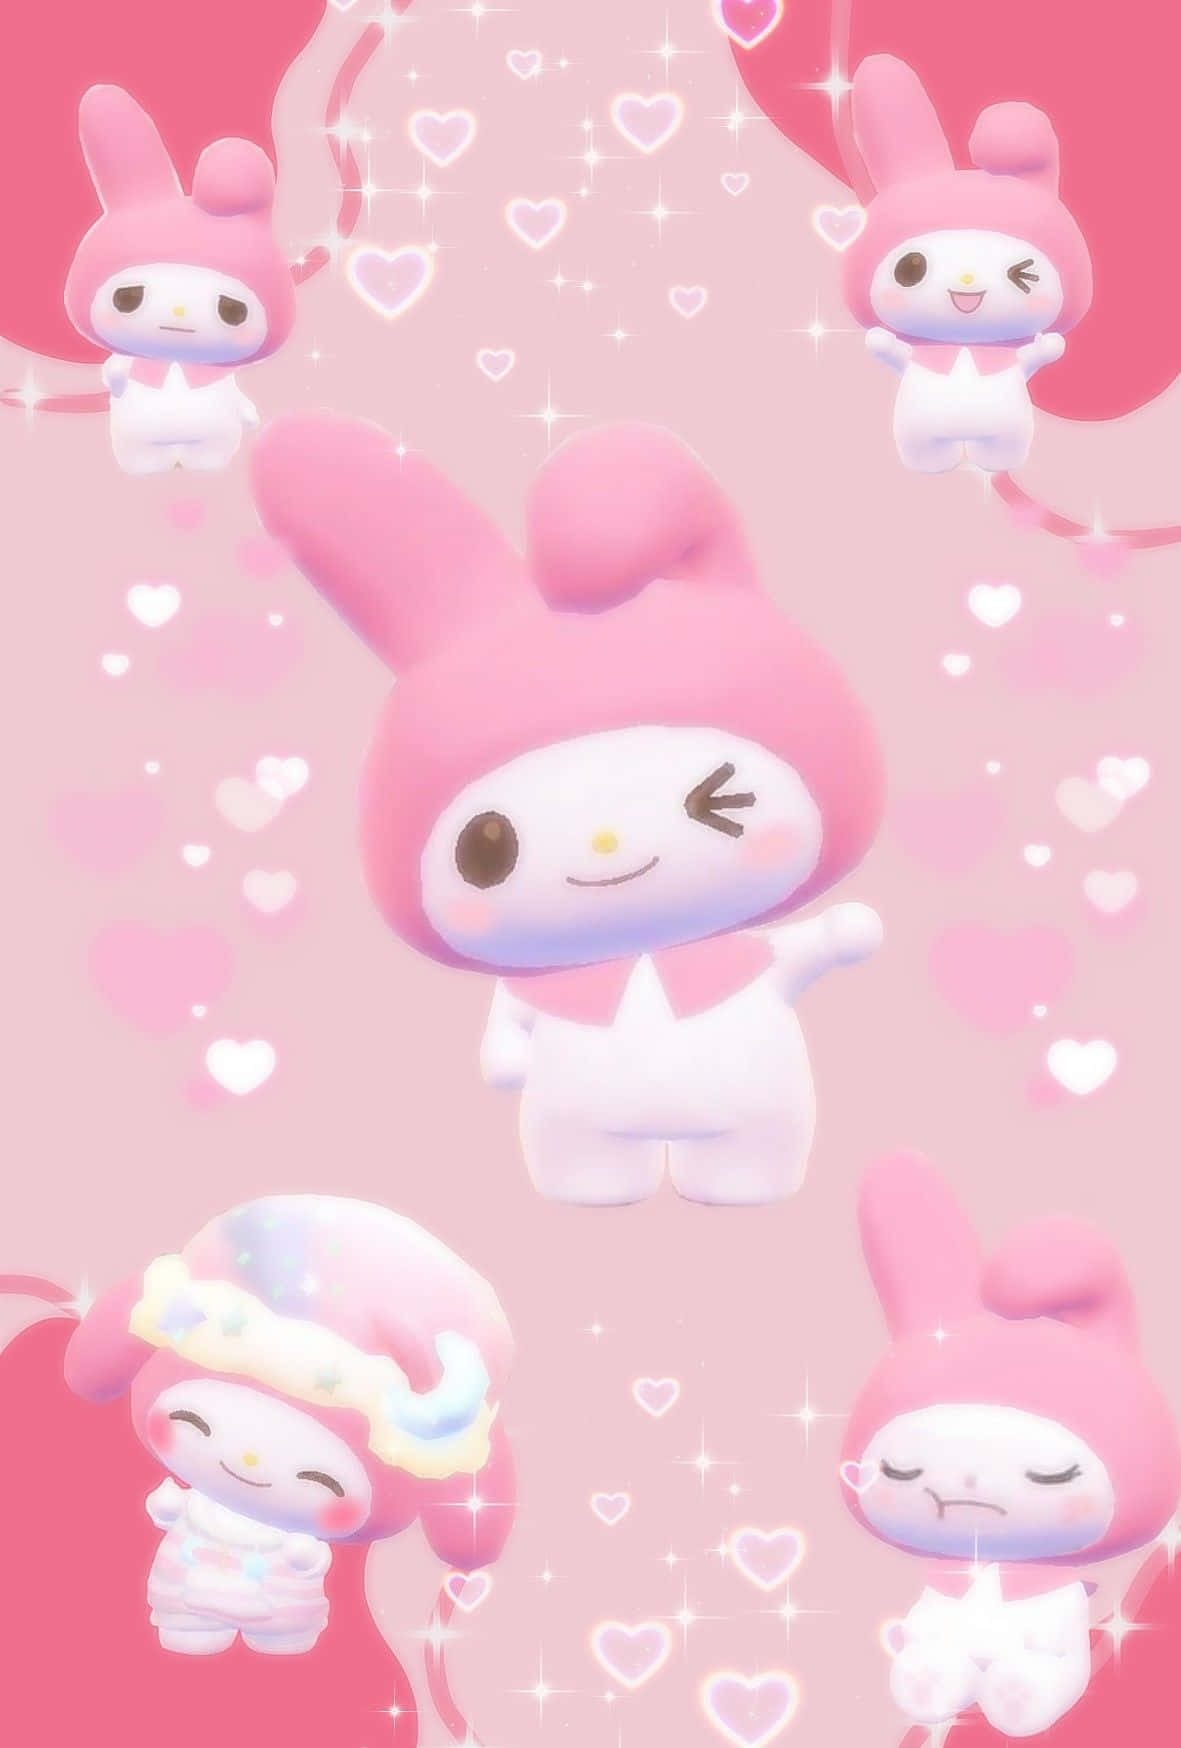 Download Enjoy the cute and cheeky demeanor of My Melody Wallpaper